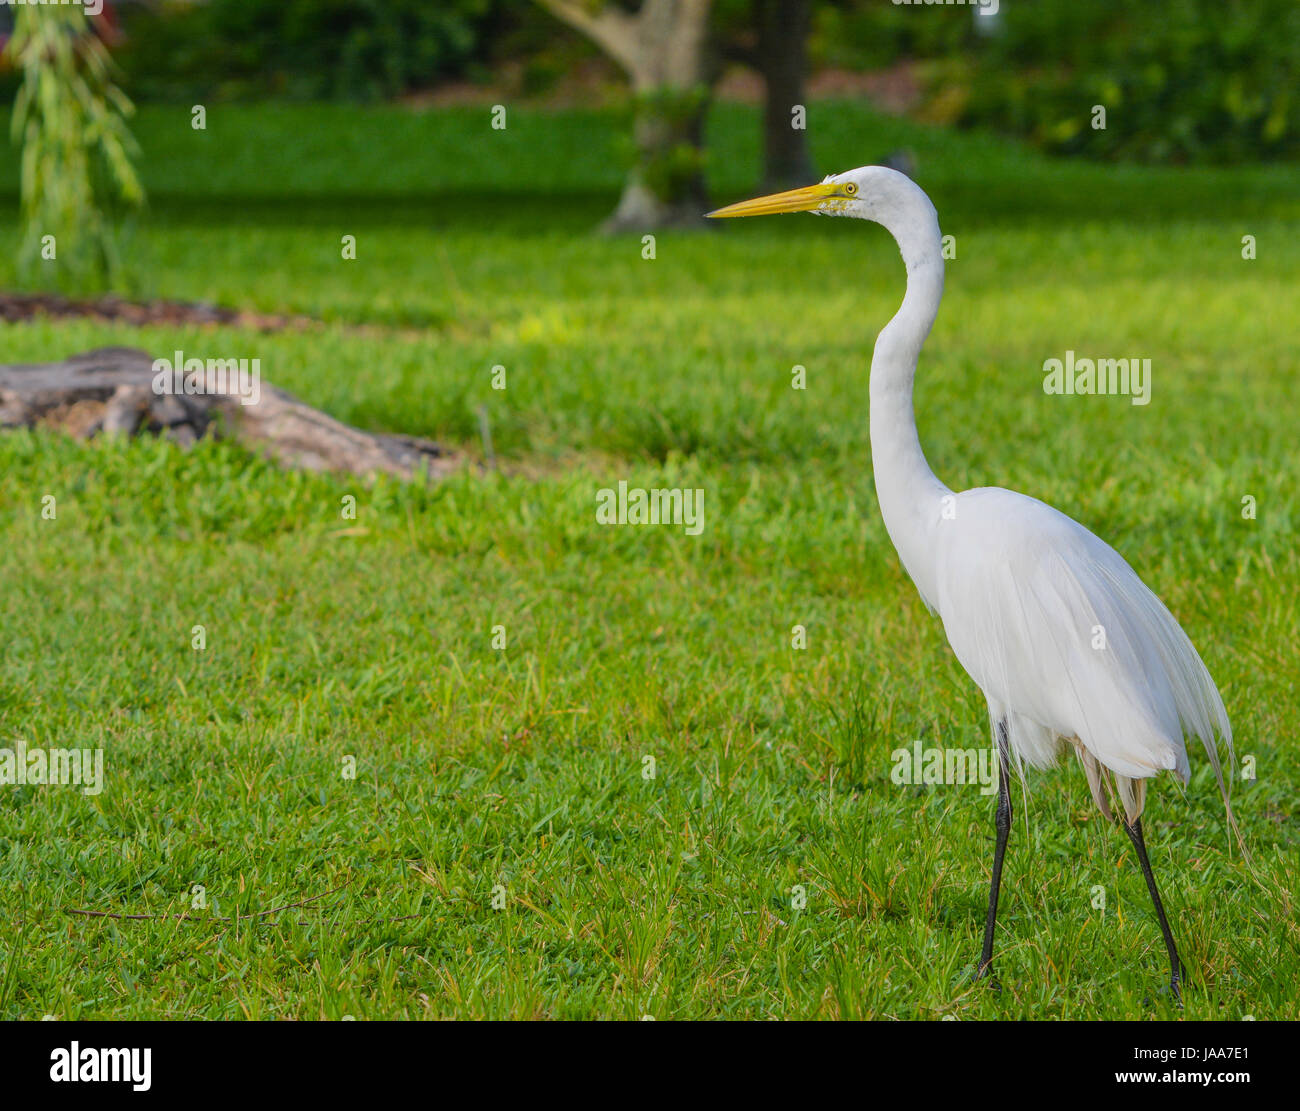 A Great White Heron (ardea herodias occidentalis)In the park at the Largo Central Park in Largo, Florida. Stock Photo